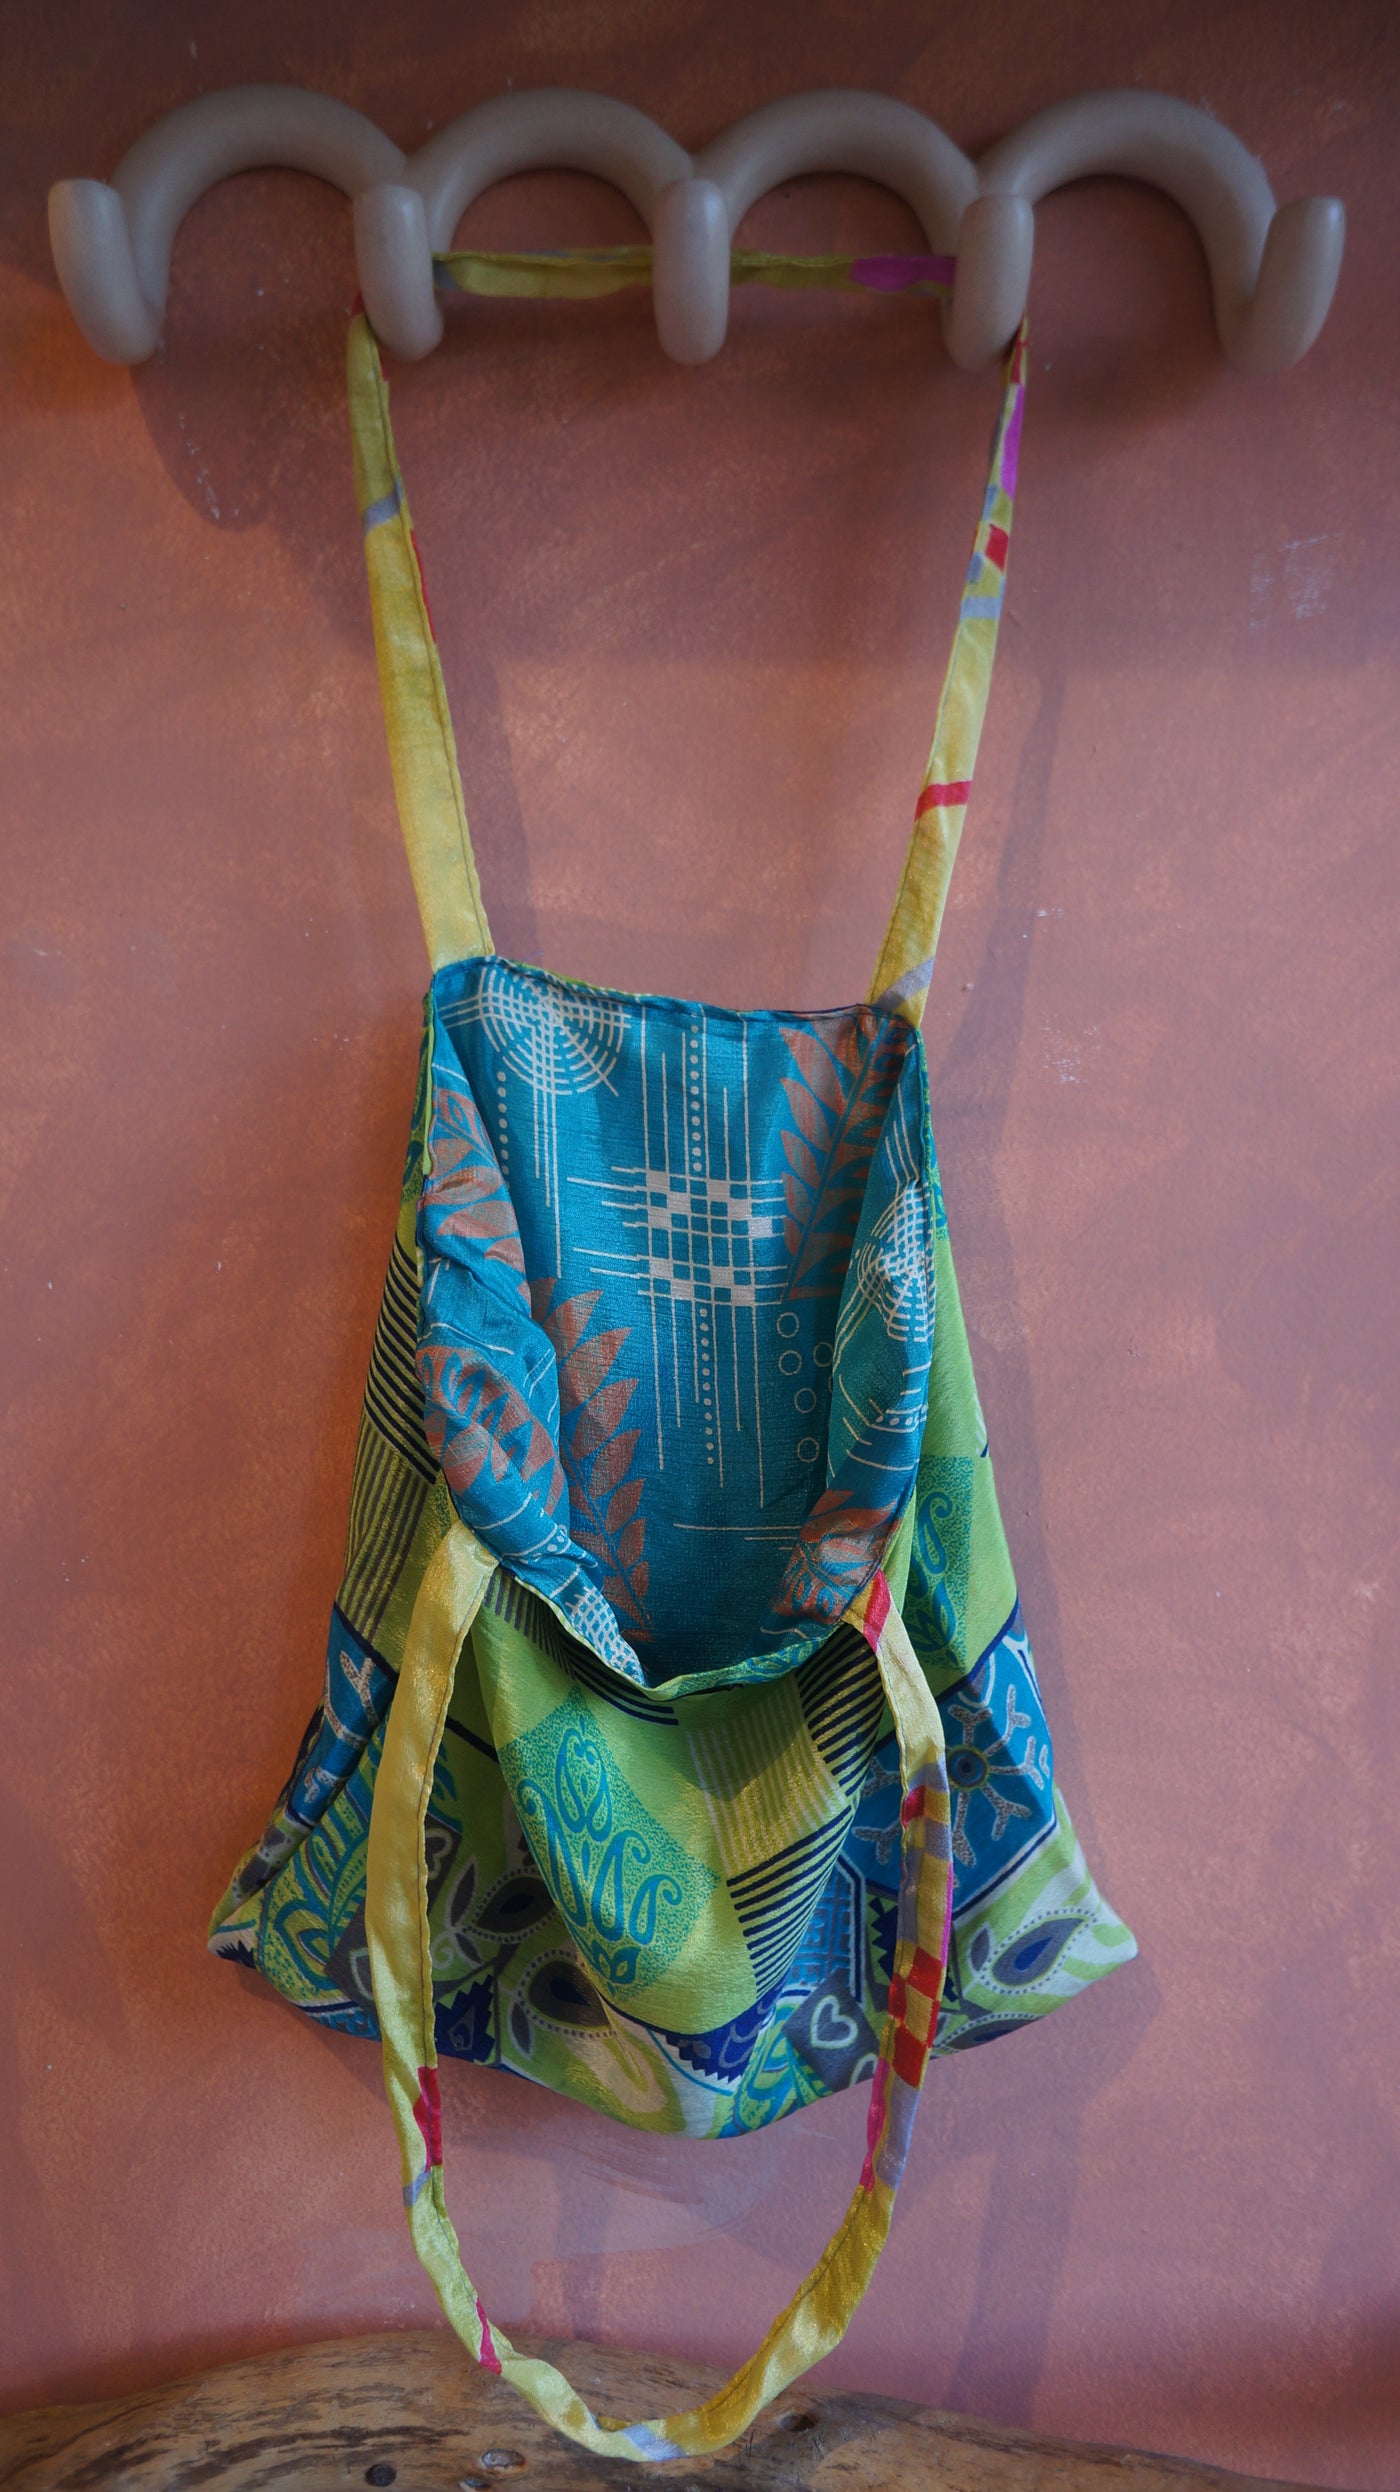 Chiquito Silk Bag - Light Green and Blue (CH2407)